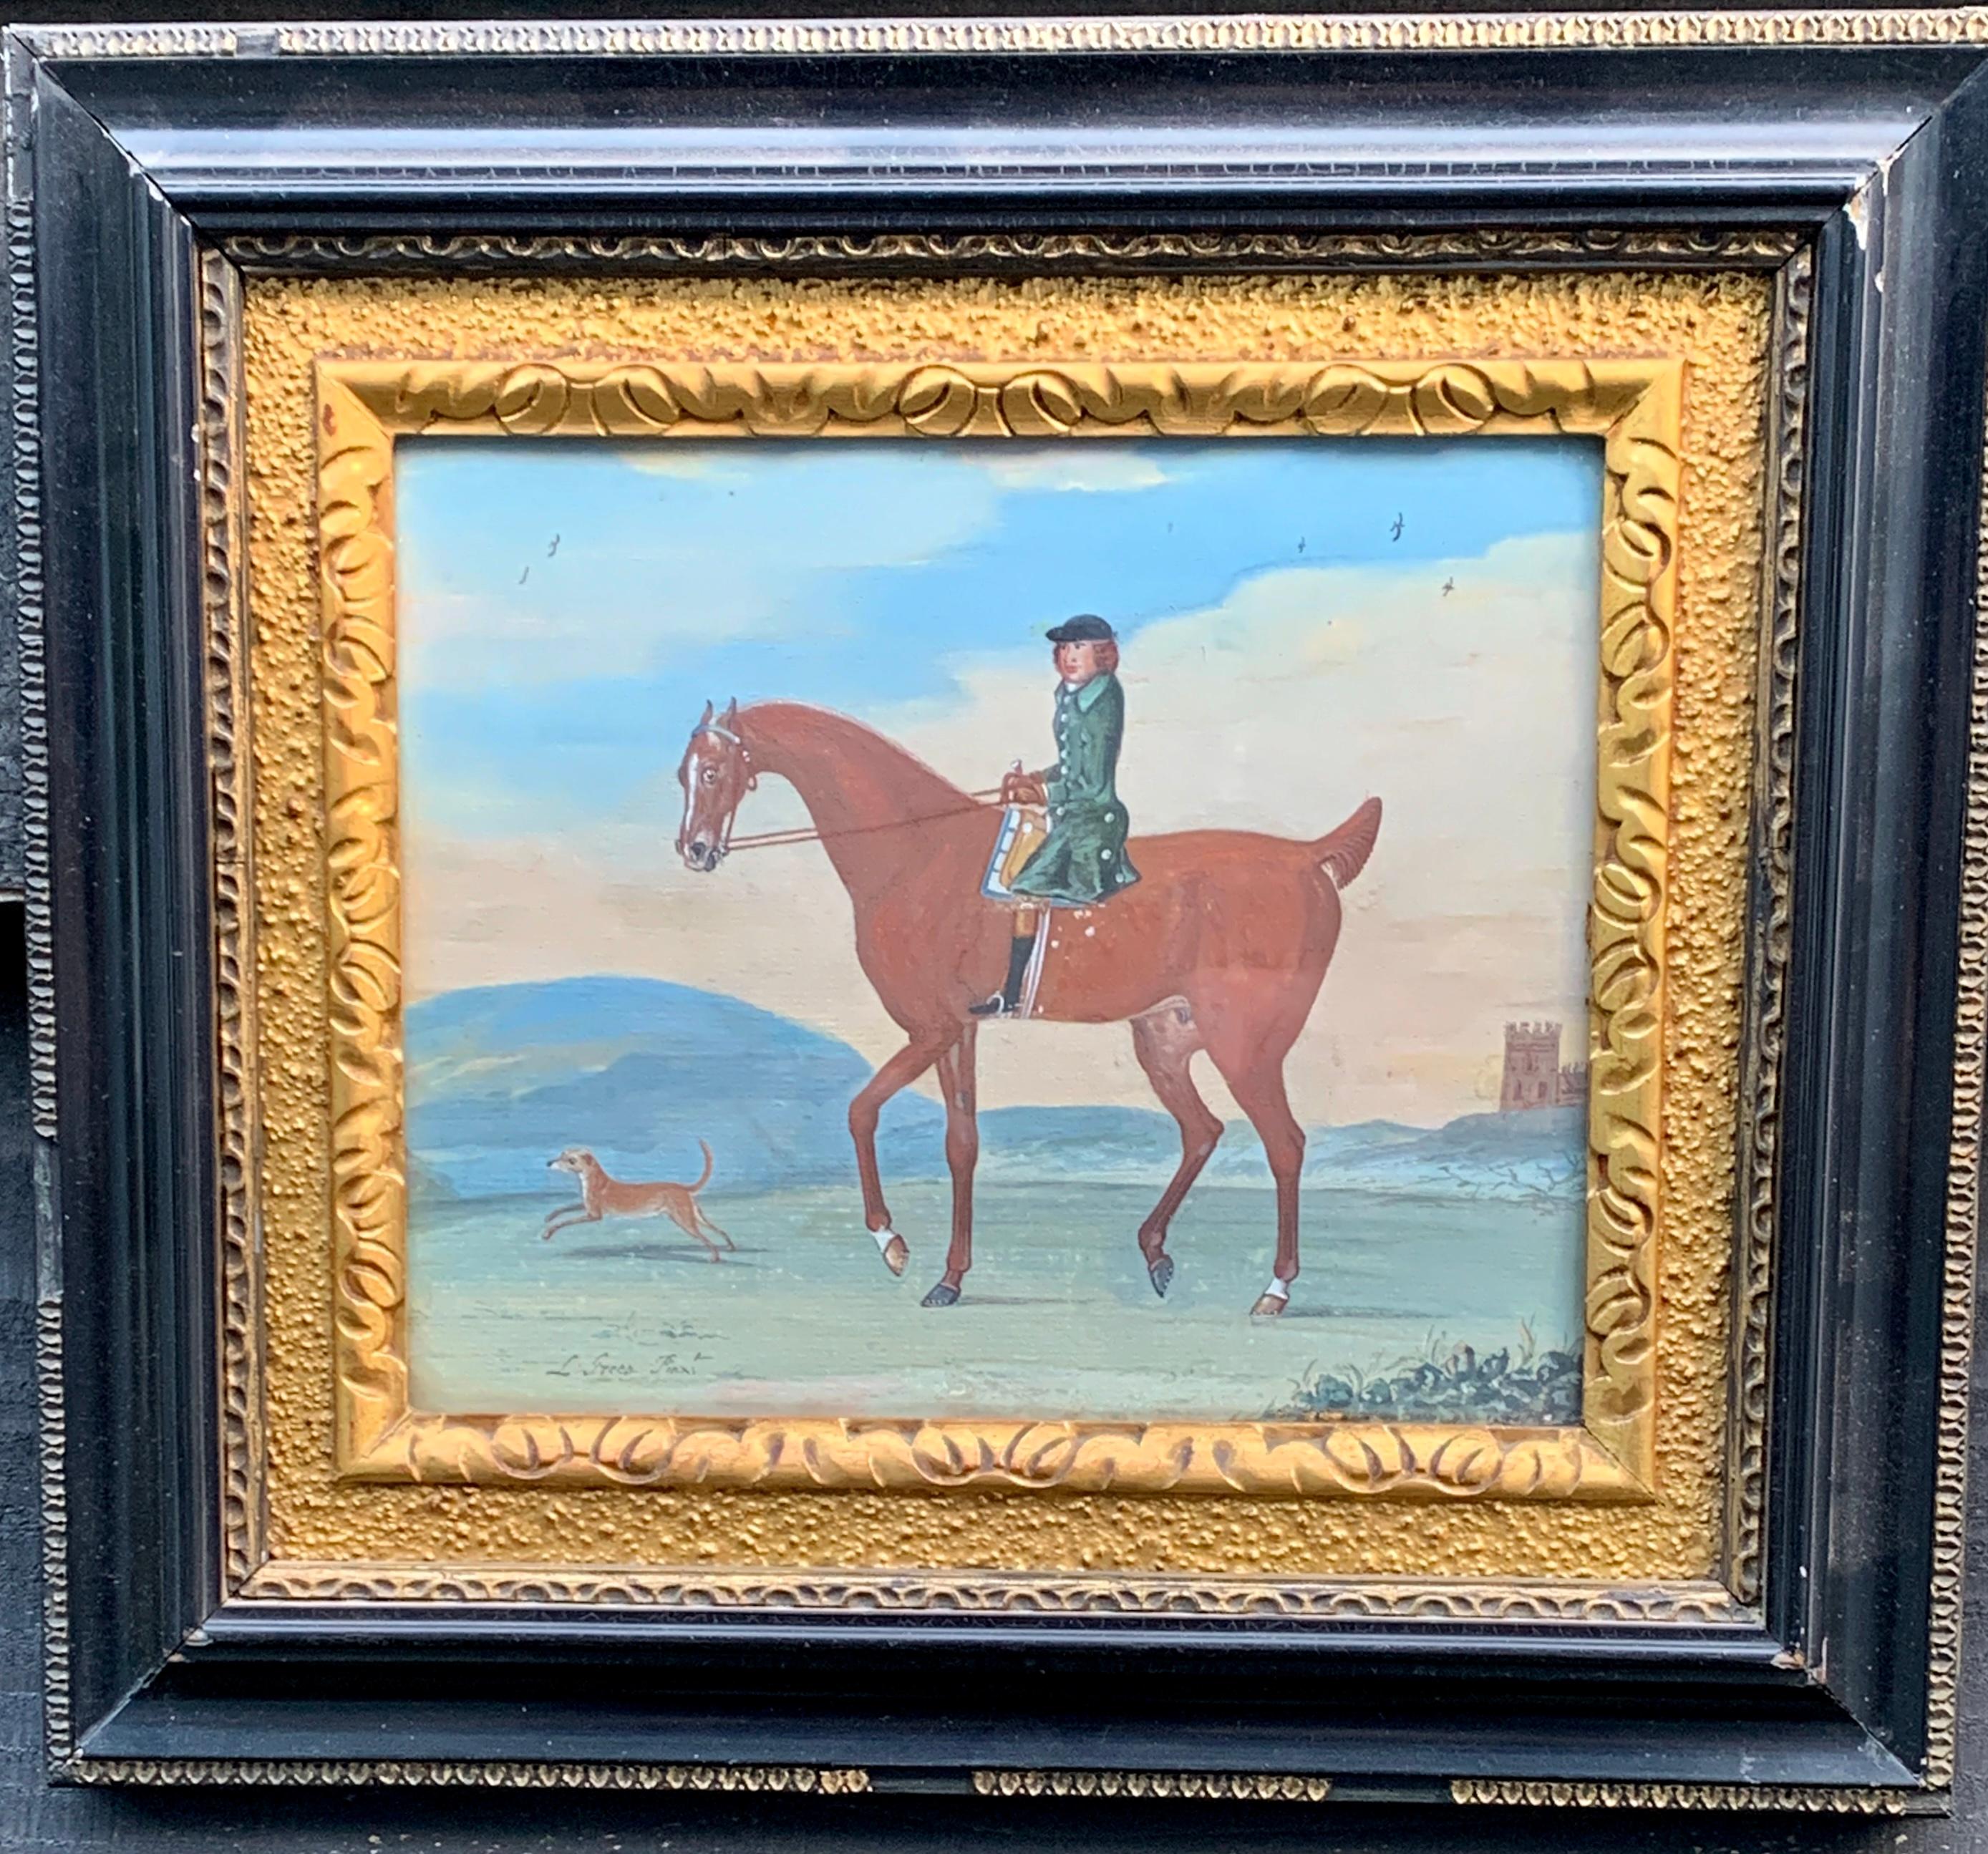 18th century English scene of a man on his horse with his dog in a landscape